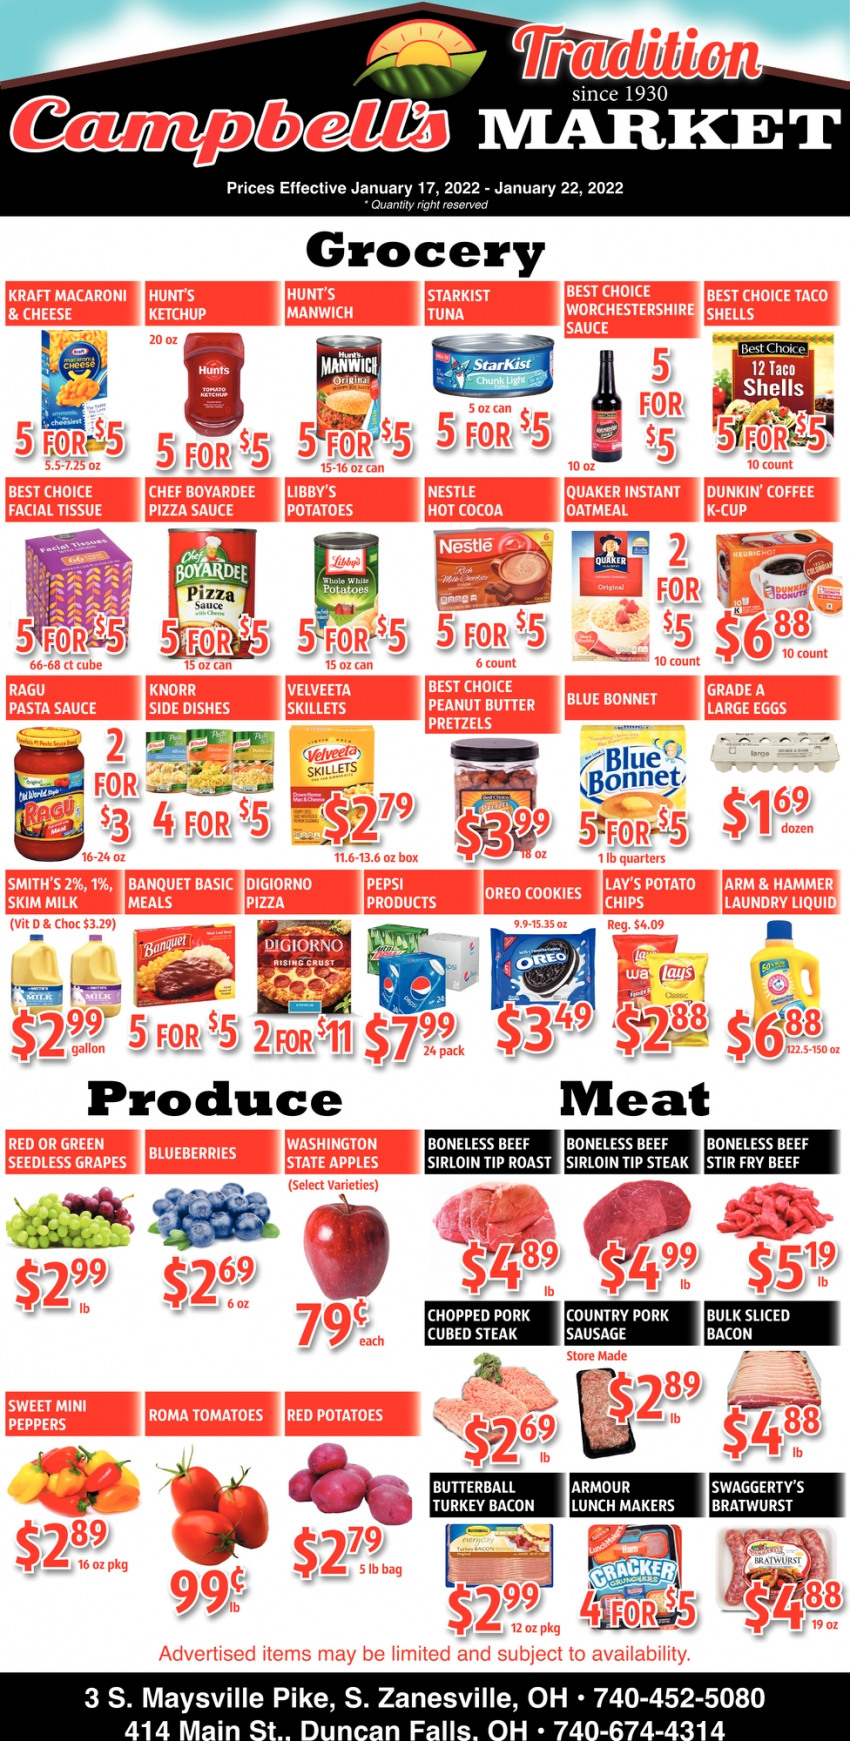 Grocery, Produce, Meat